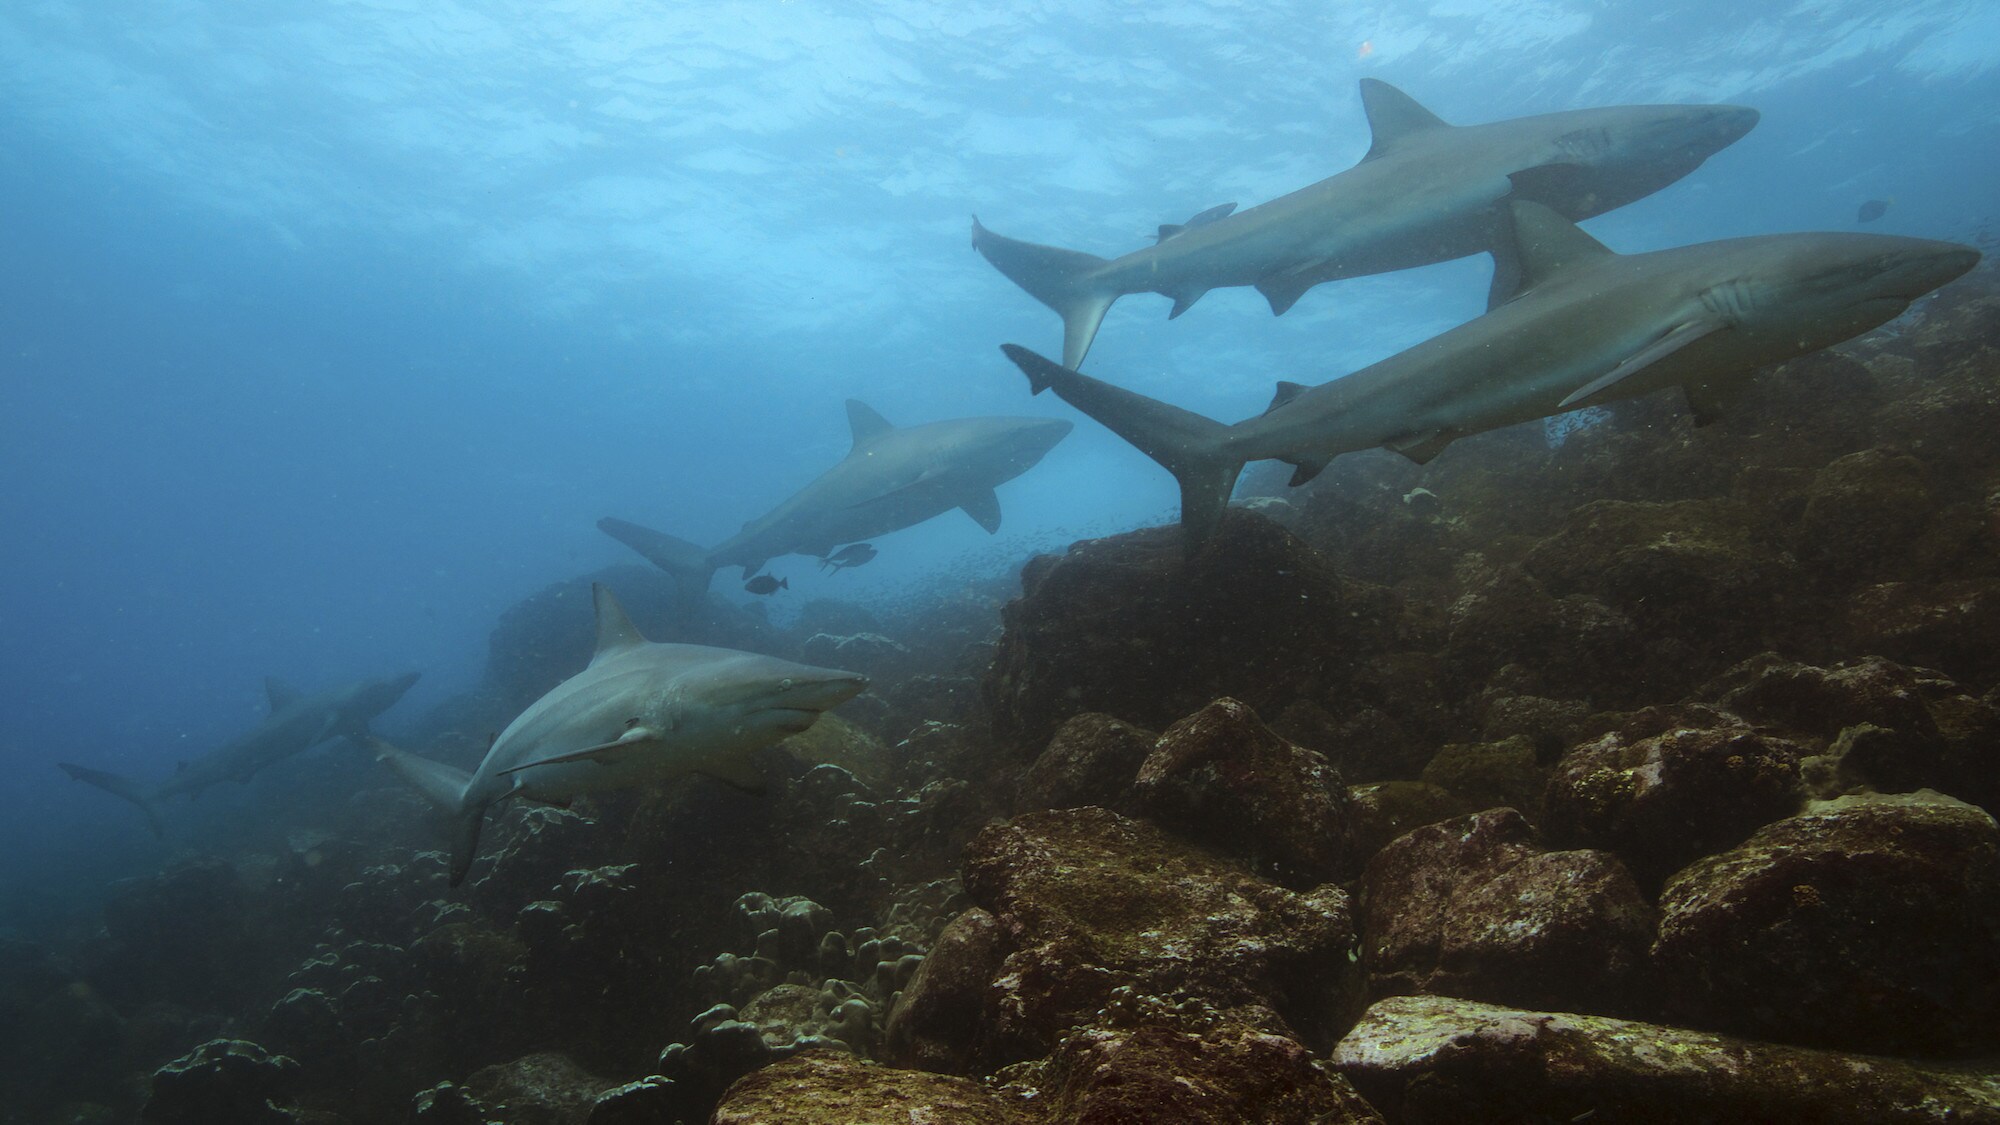 Five Galapagos sharks swimming over rocks. (National Geographic for Disney+/Bertie Gregory)